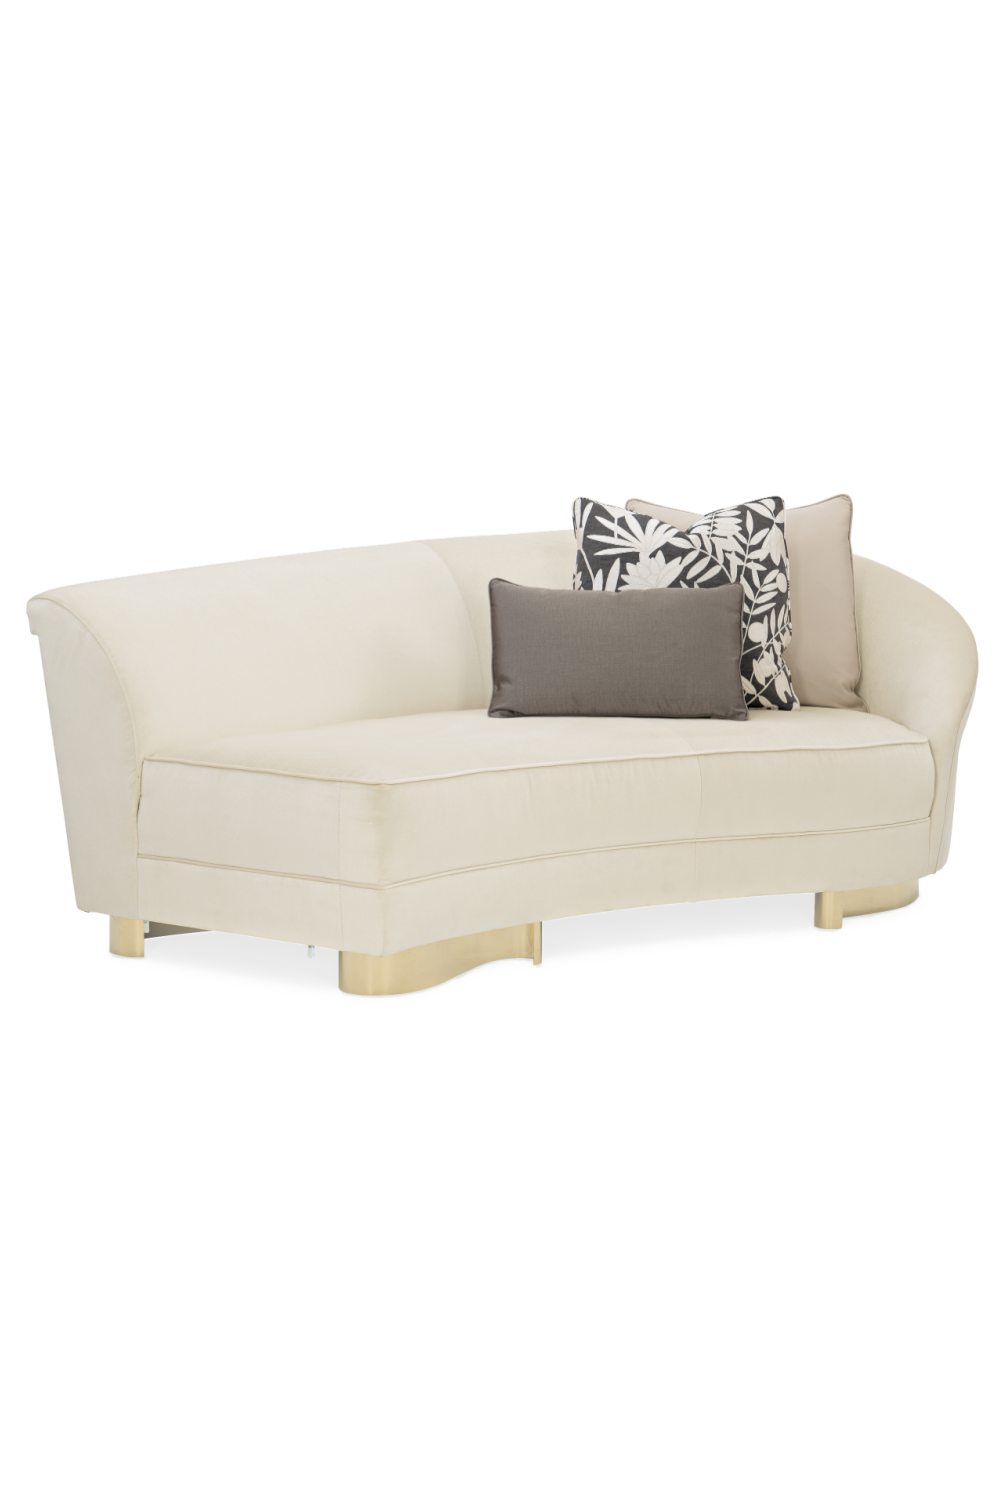 Curved Modern Sectional Sofa | Caracole Grand Opening | Oroa.com